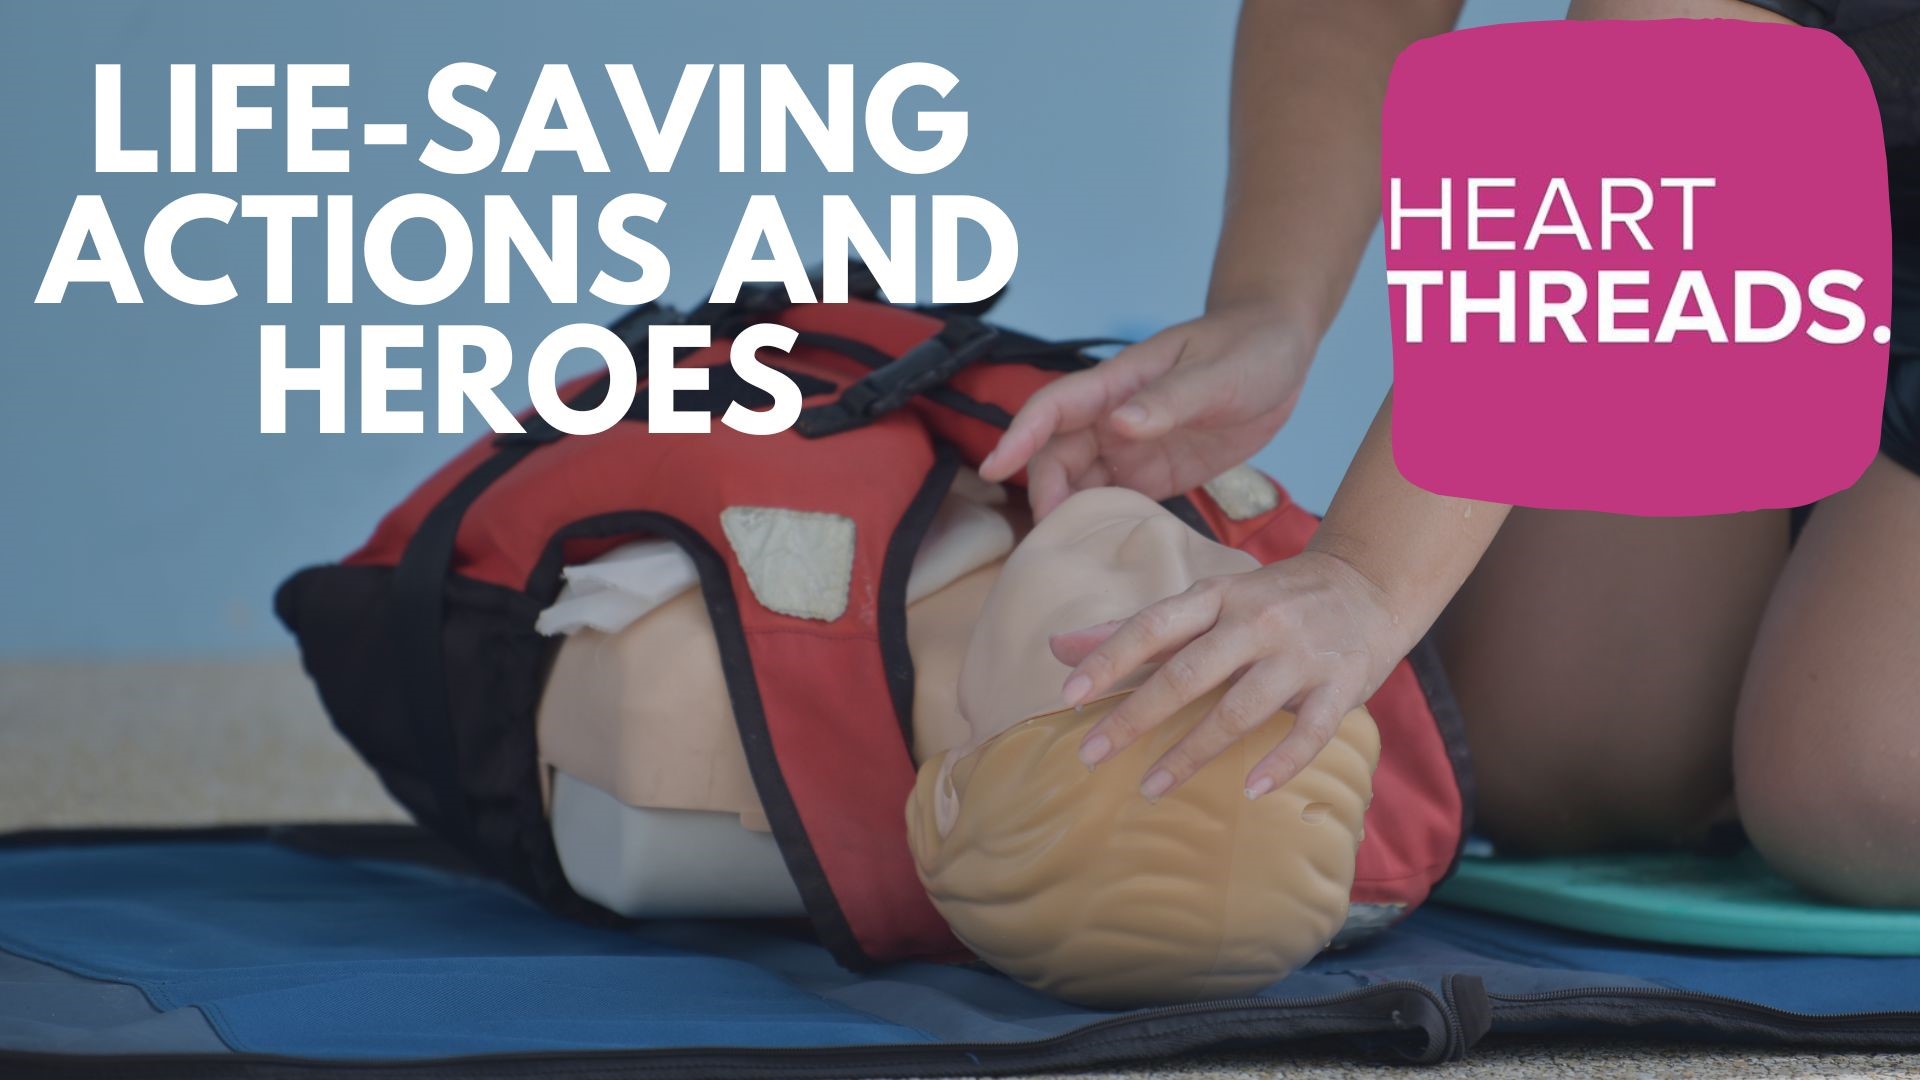 A collection of stories showcasing the heroes among us who have acted quickly to perform life-saving actions. The everyday heroes going above and beyond.